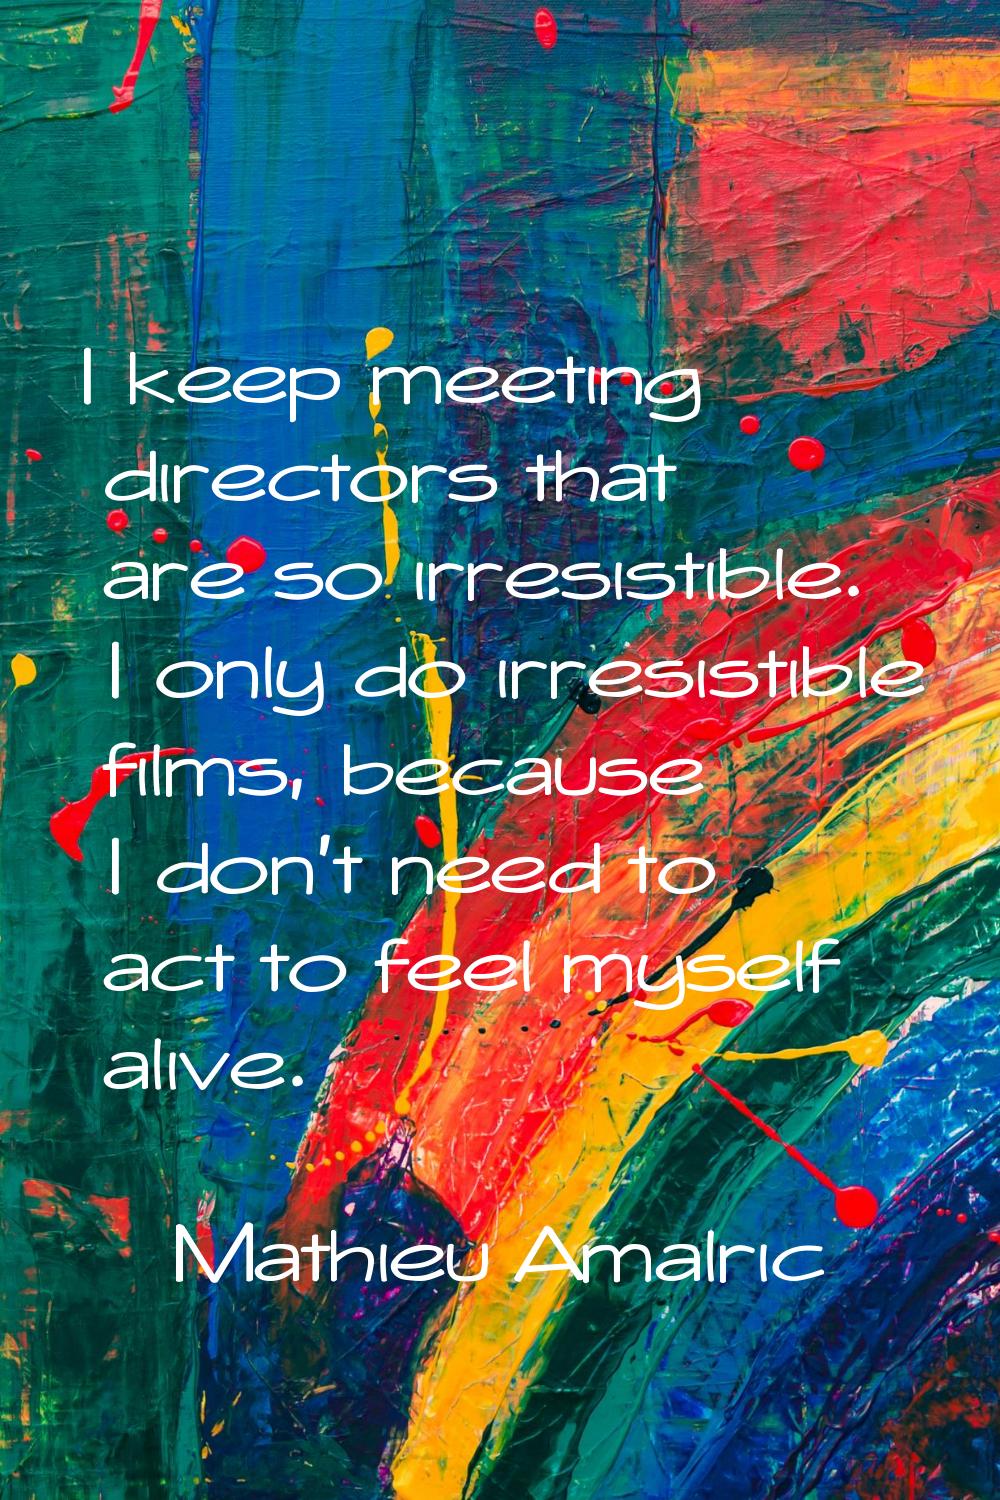 I keep meeting directors that are so irresistible. I only do irresistible films, because I don't ne